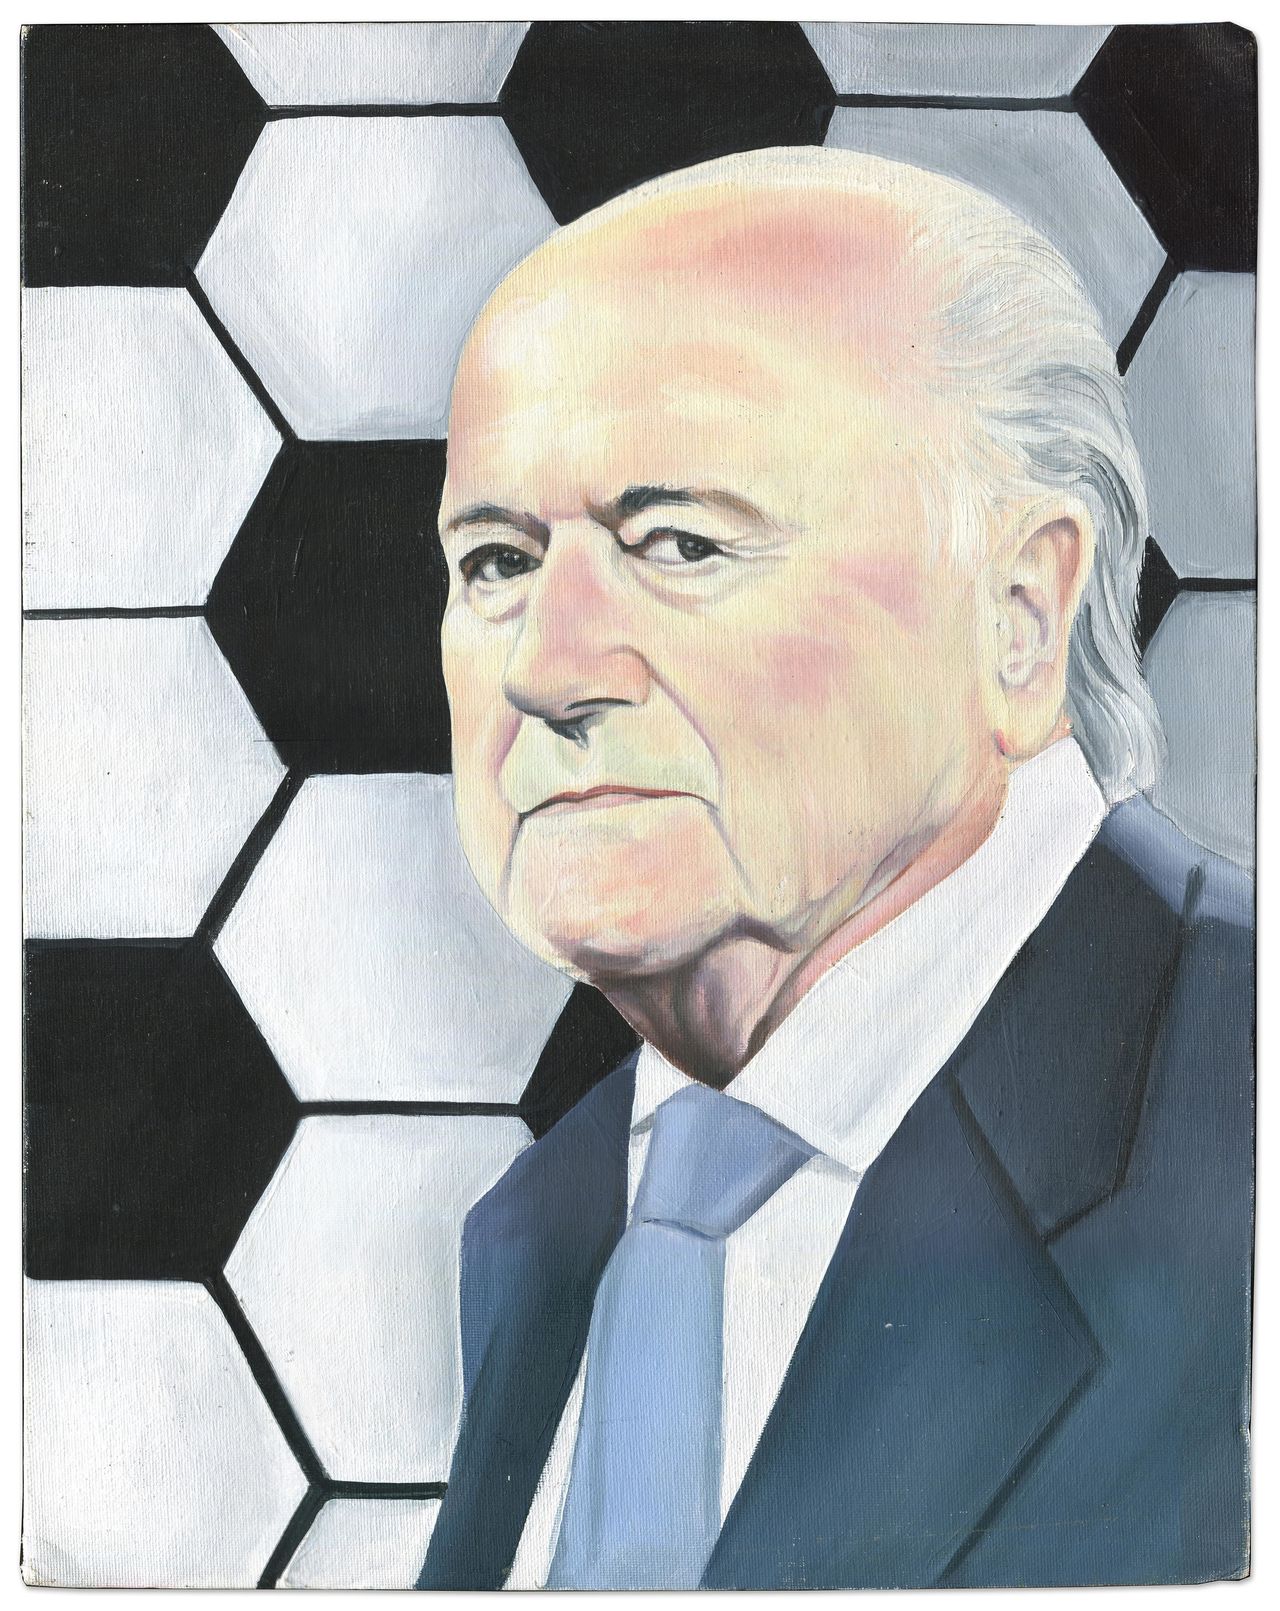 Lewis Walters (Prison ID #38699-007) drew former president of FIFA Sepp Blatter. Blatter is accused of conspiracy, supporting slave labor, theft and wire fraud. Walters is currently serving 72 years for assault with intent to commit murder. Read more here.